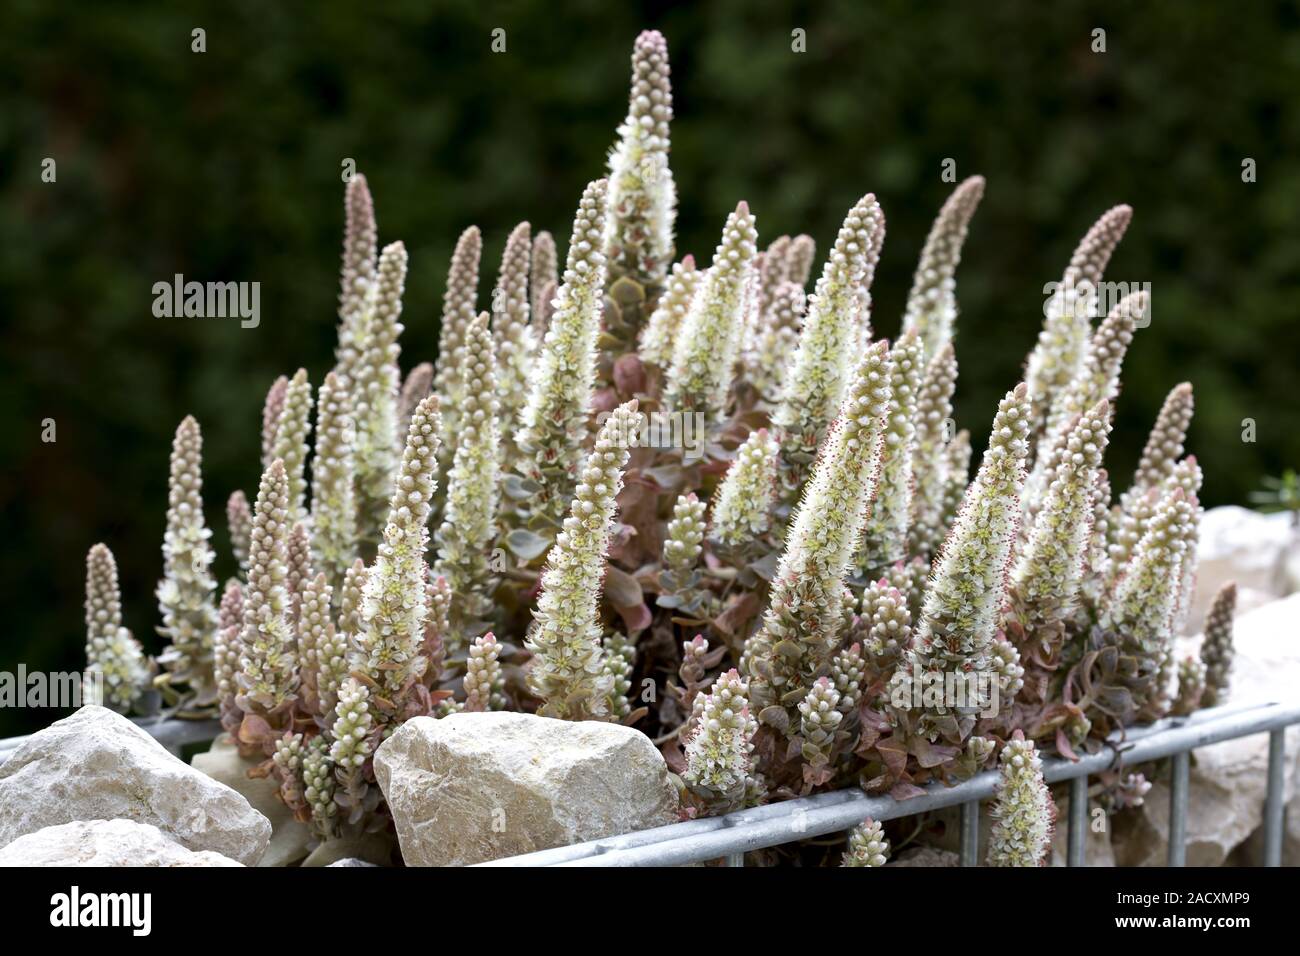 Chinese Orostachys Succulents, stonecrop flower Stock Photo